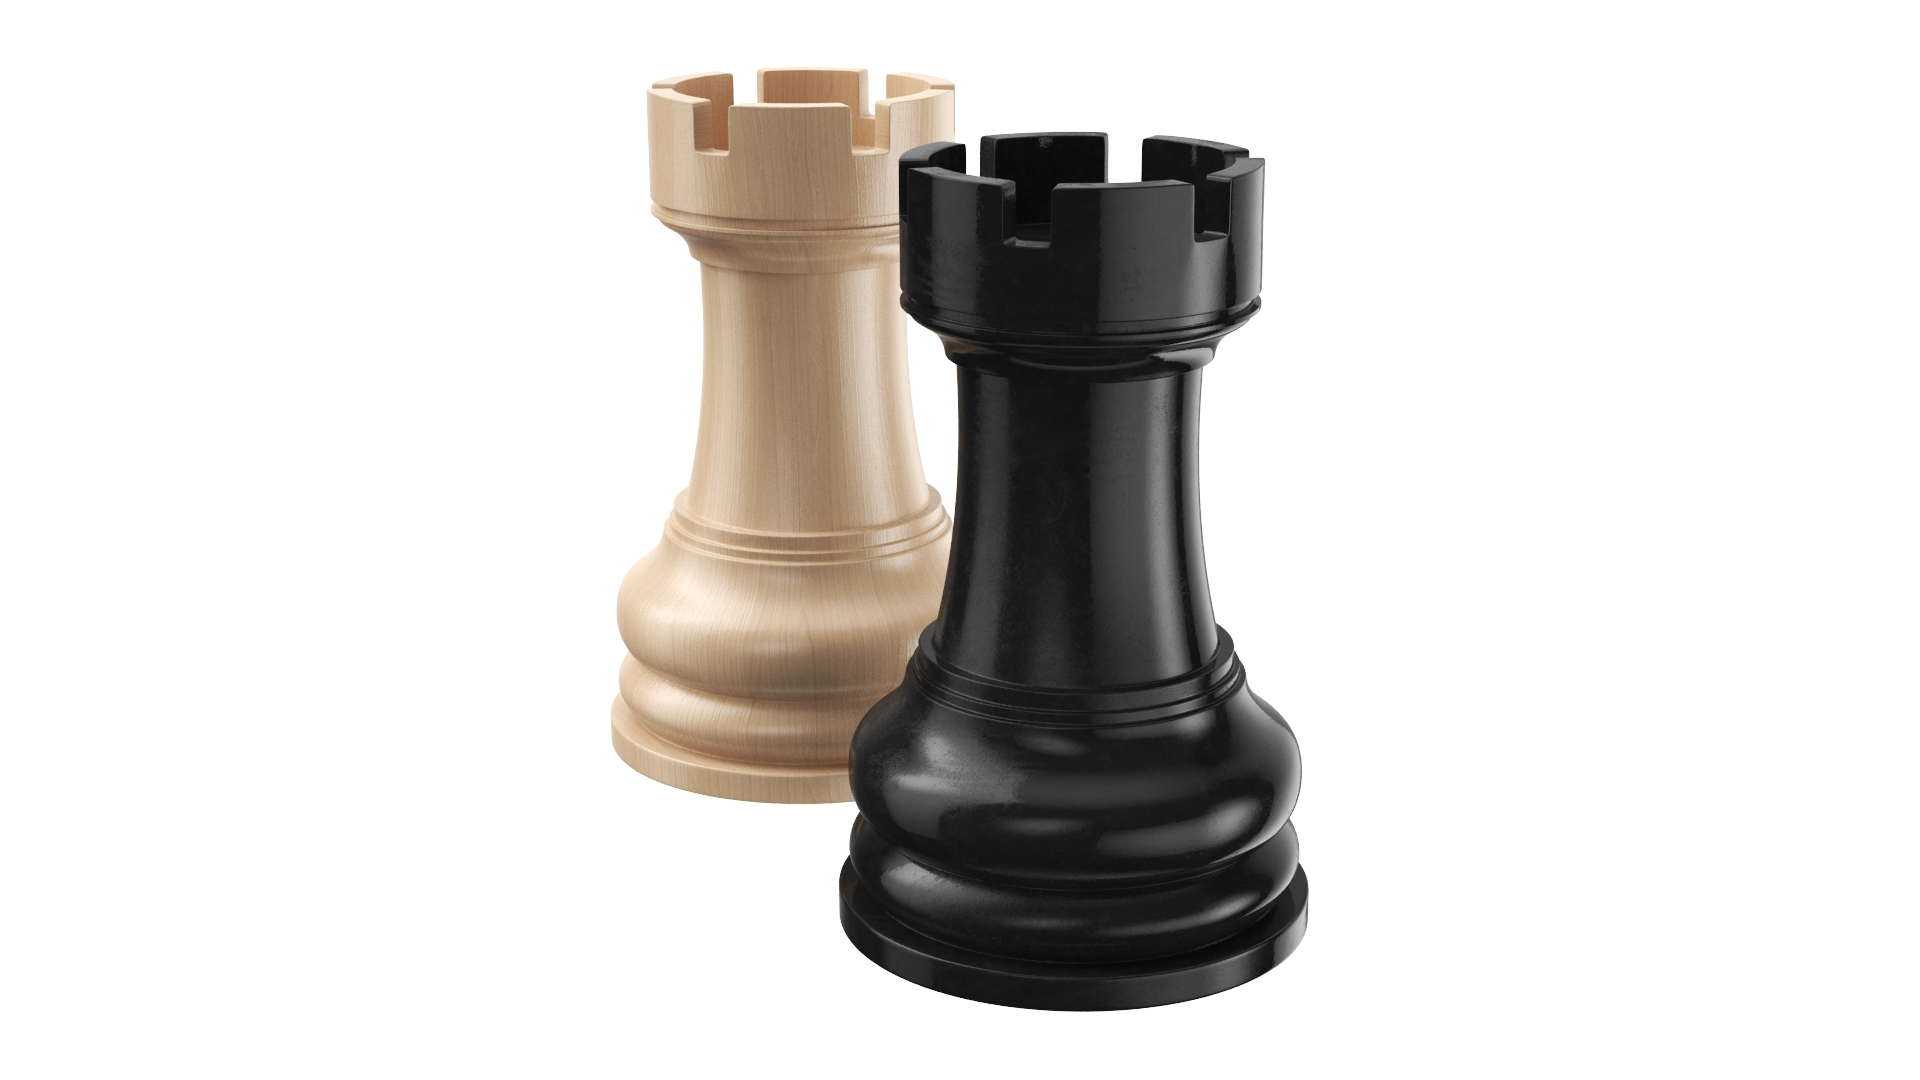 Rook - Chess Terms 